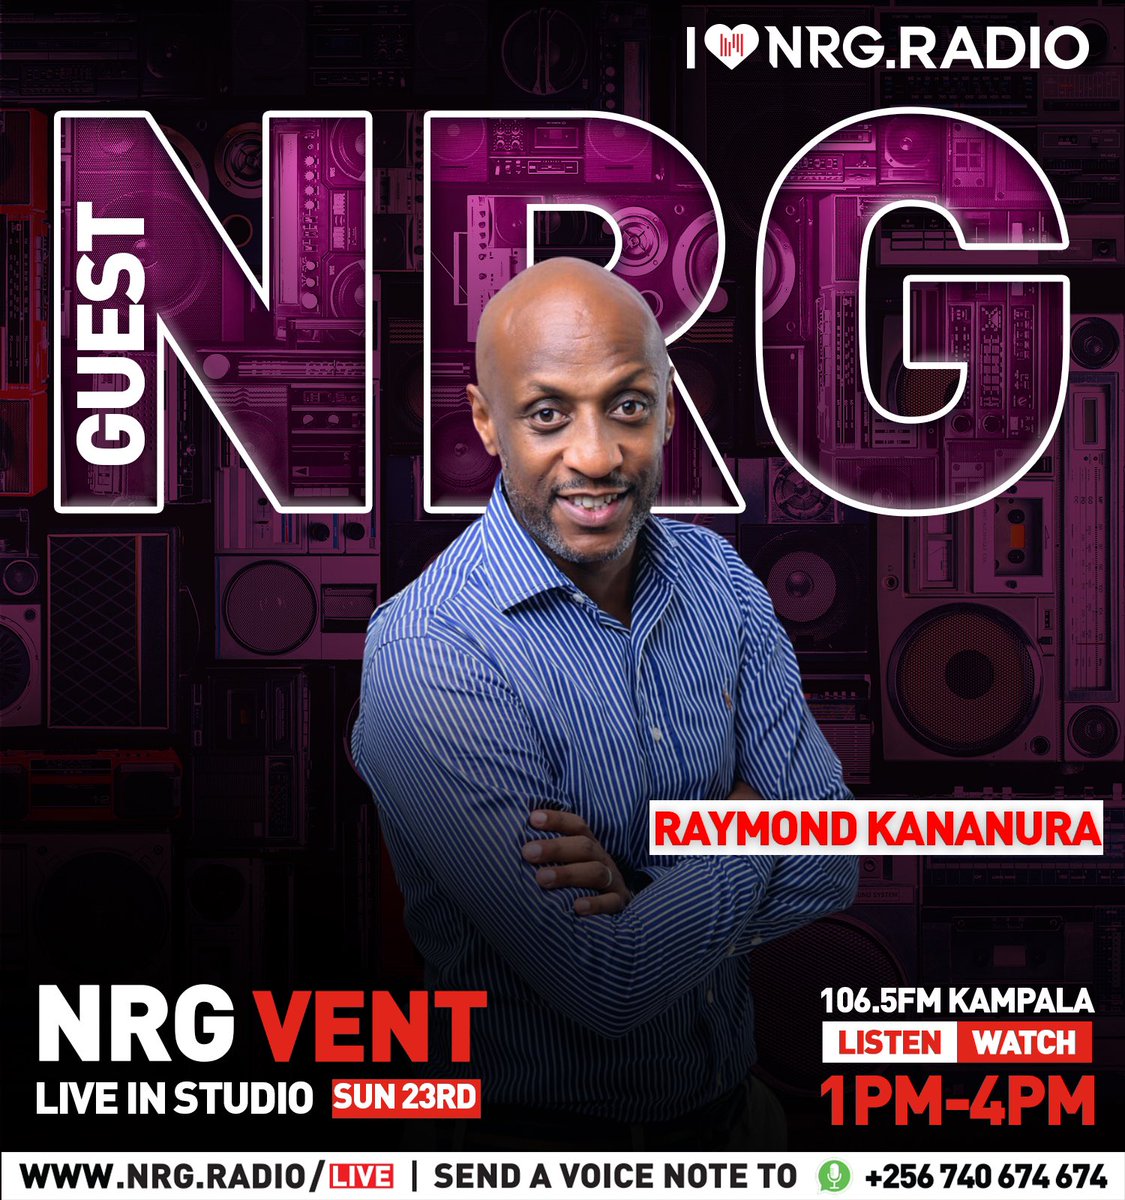 Today on @nrgventug, #Raymondkananura is coming through to talk about Overcoming alcohol and drug dependency with @sandra_cope40 Tune in to 106.5 or stream live via nrg.radio #NRGVentUG #NRGRadioUG